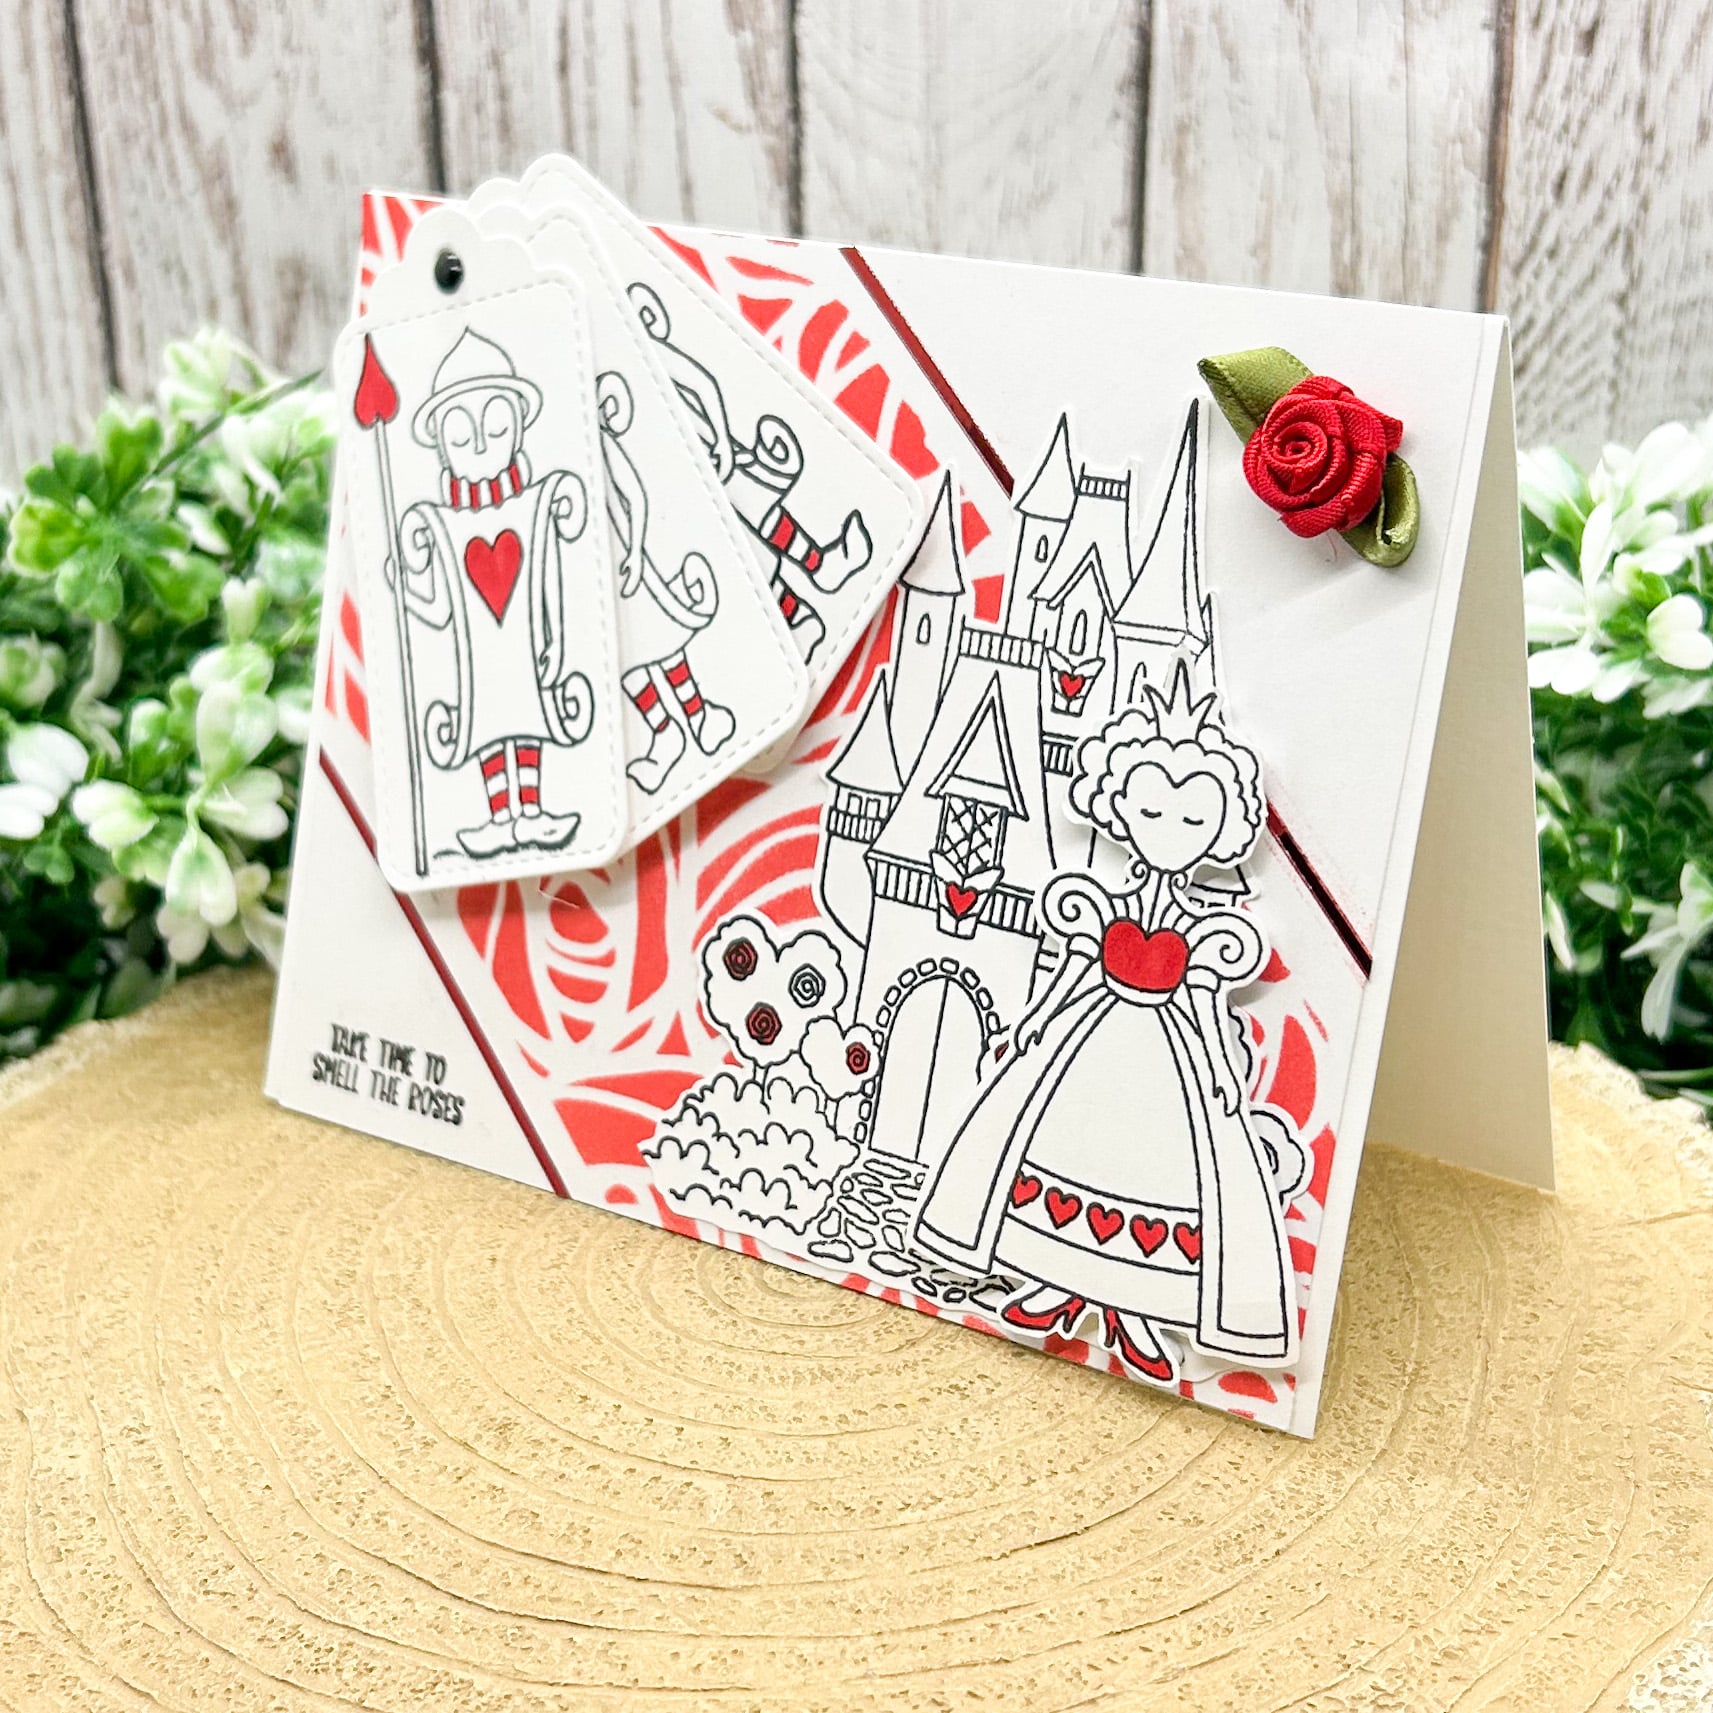 Queen Of Hearts Smell The Roses Handmade Card-1